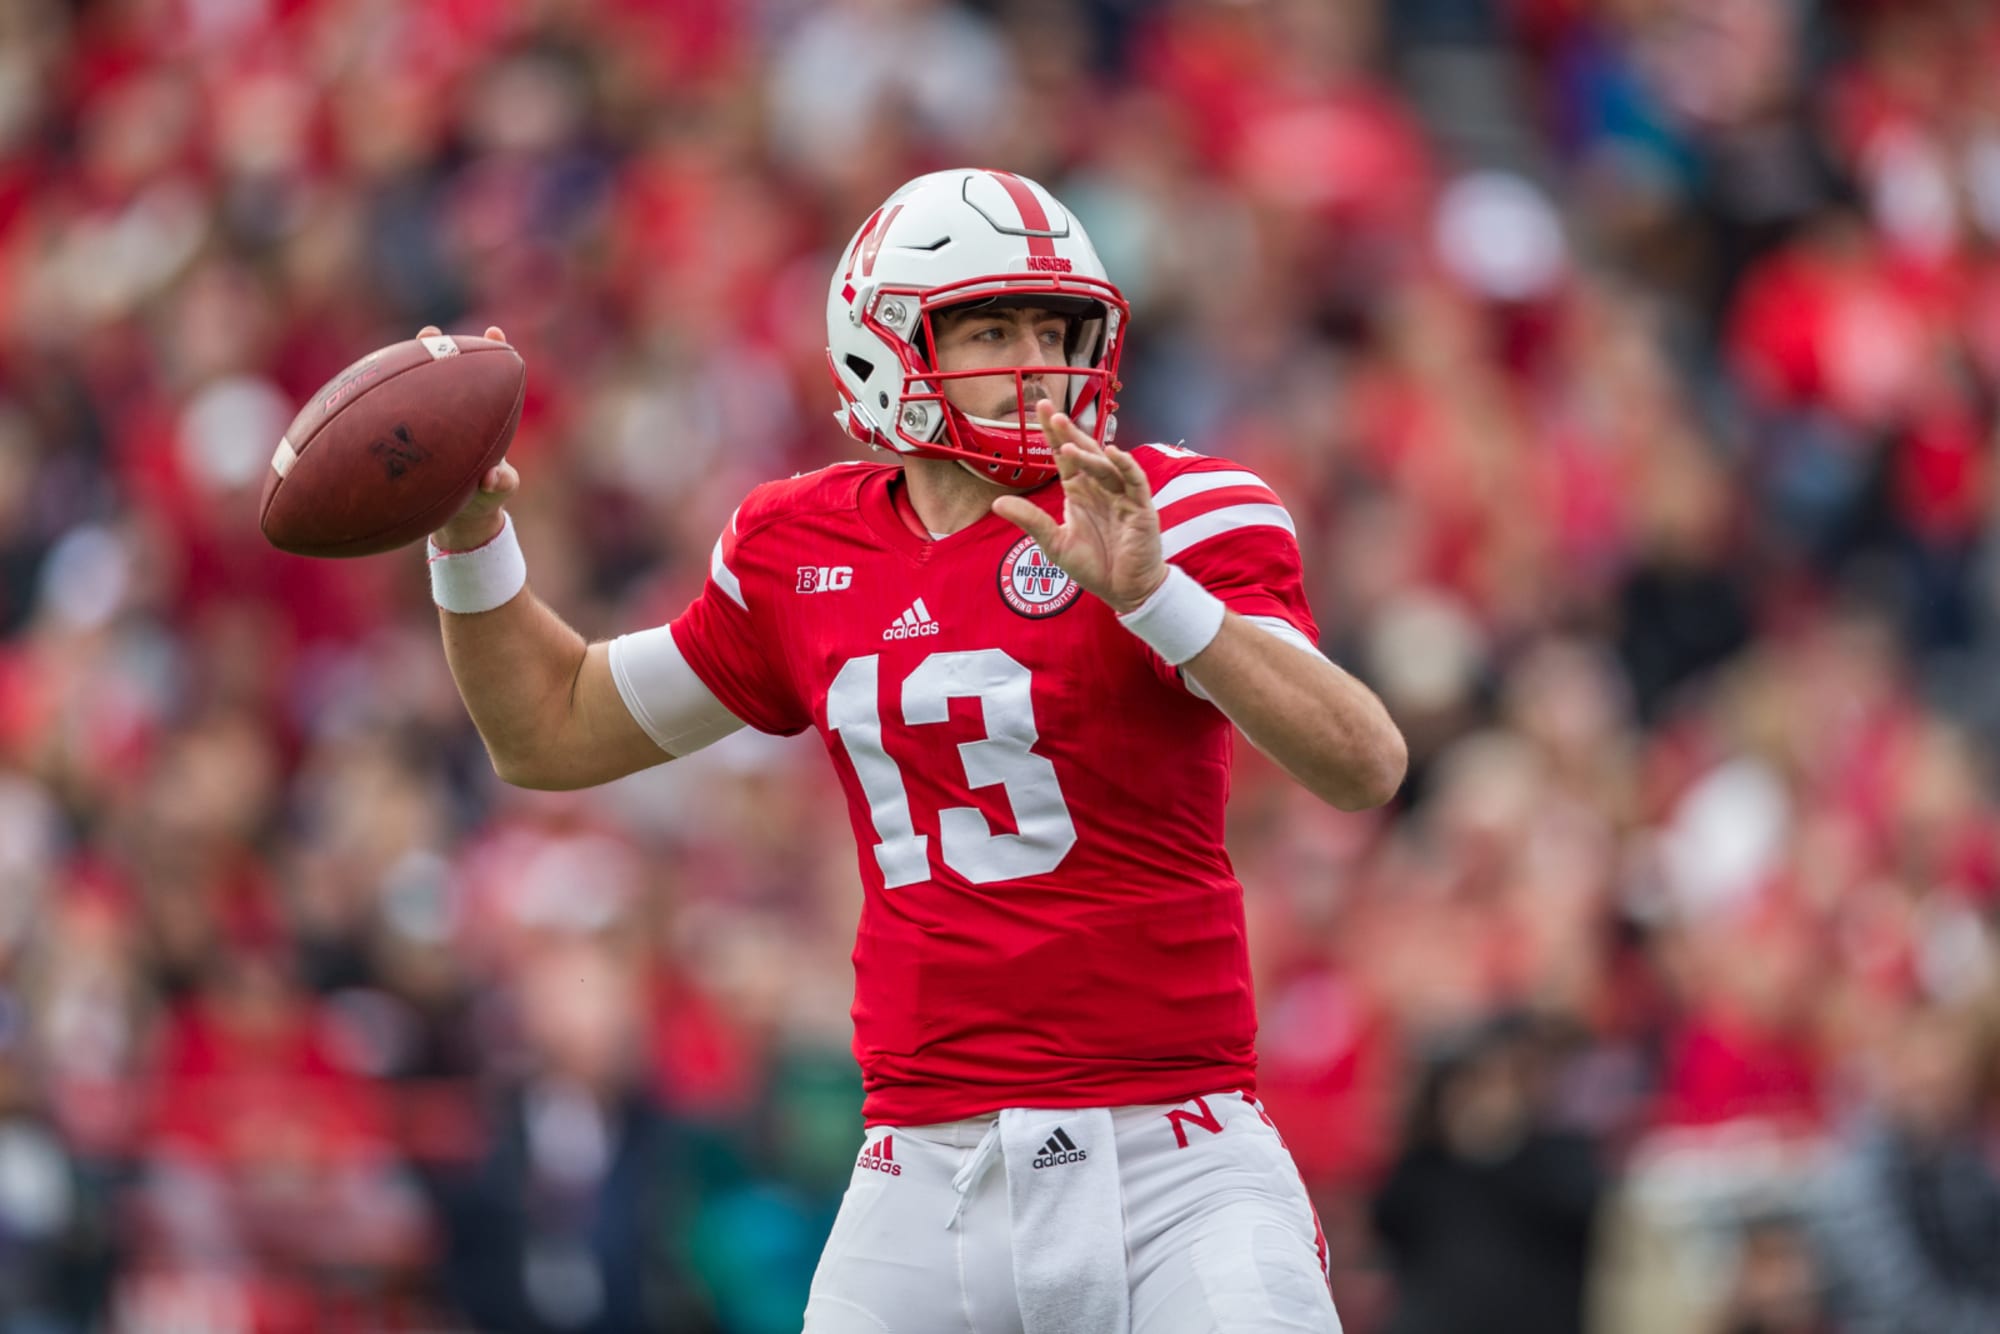 Nebraska Football Tanner Lee drafted 203rd overall by Jaguars